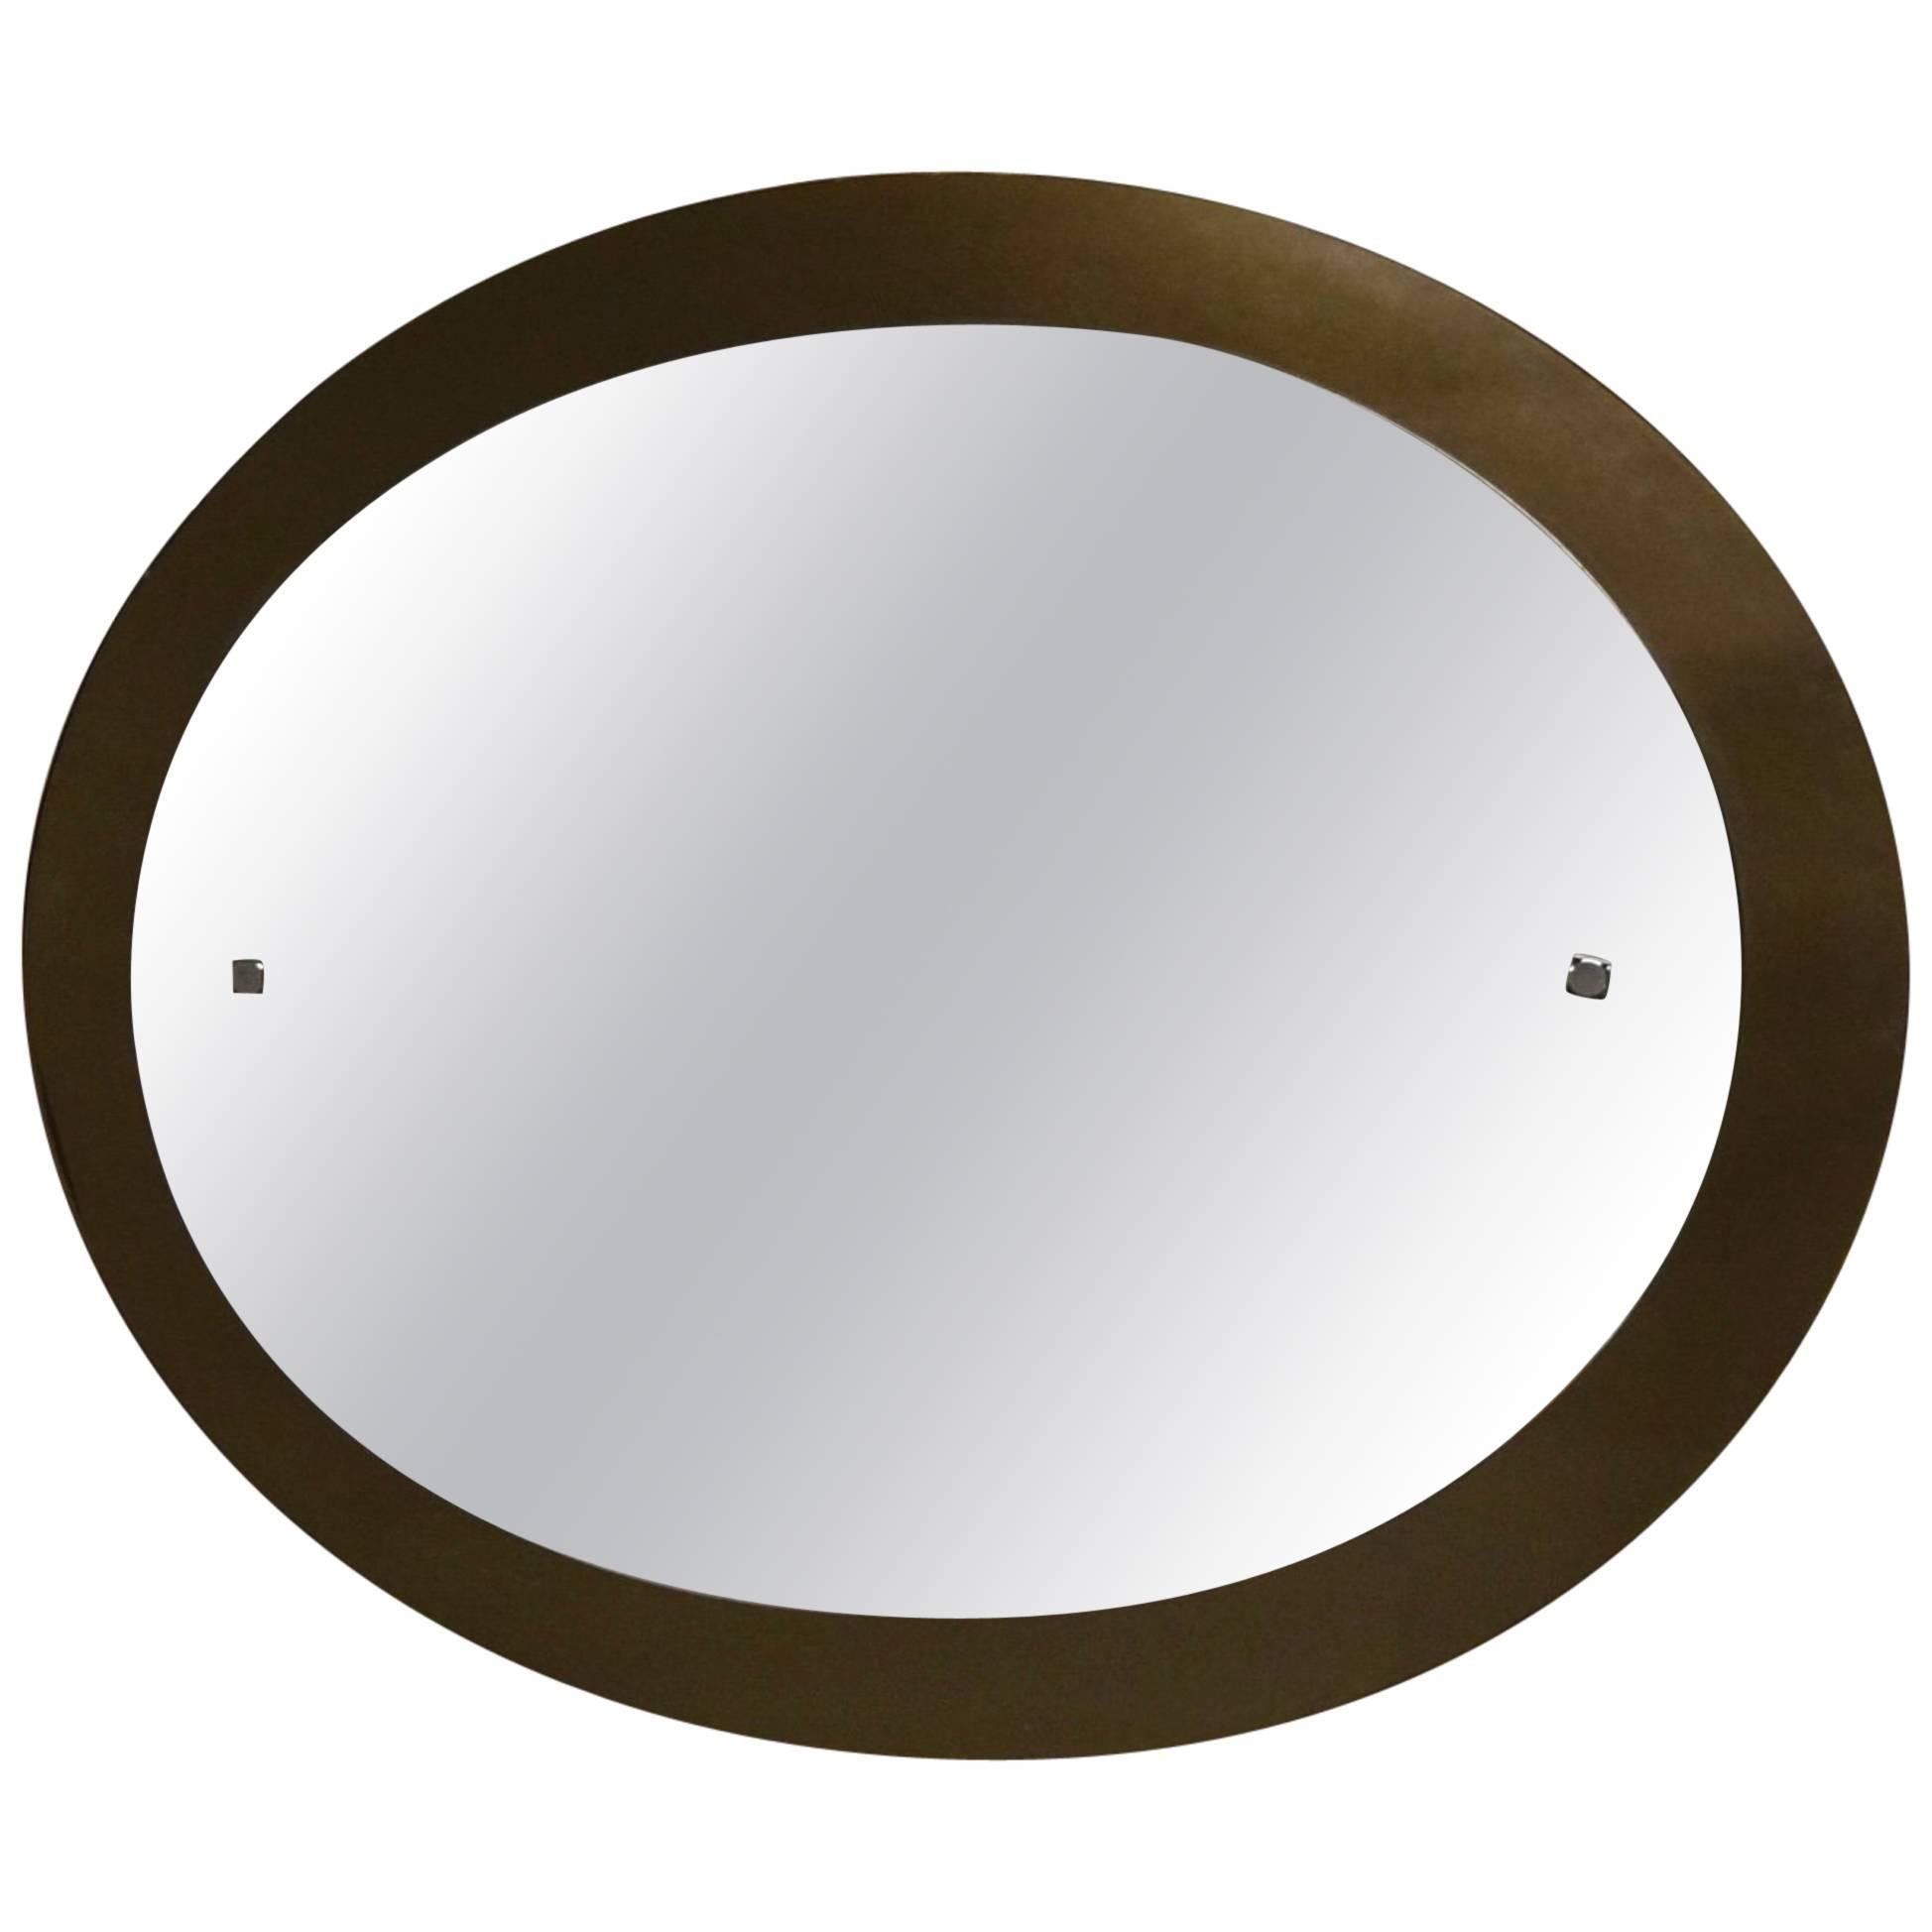 Oval Beveled Mirror with a Smoked Mirror Border, Italy, circa 1970 For Sale